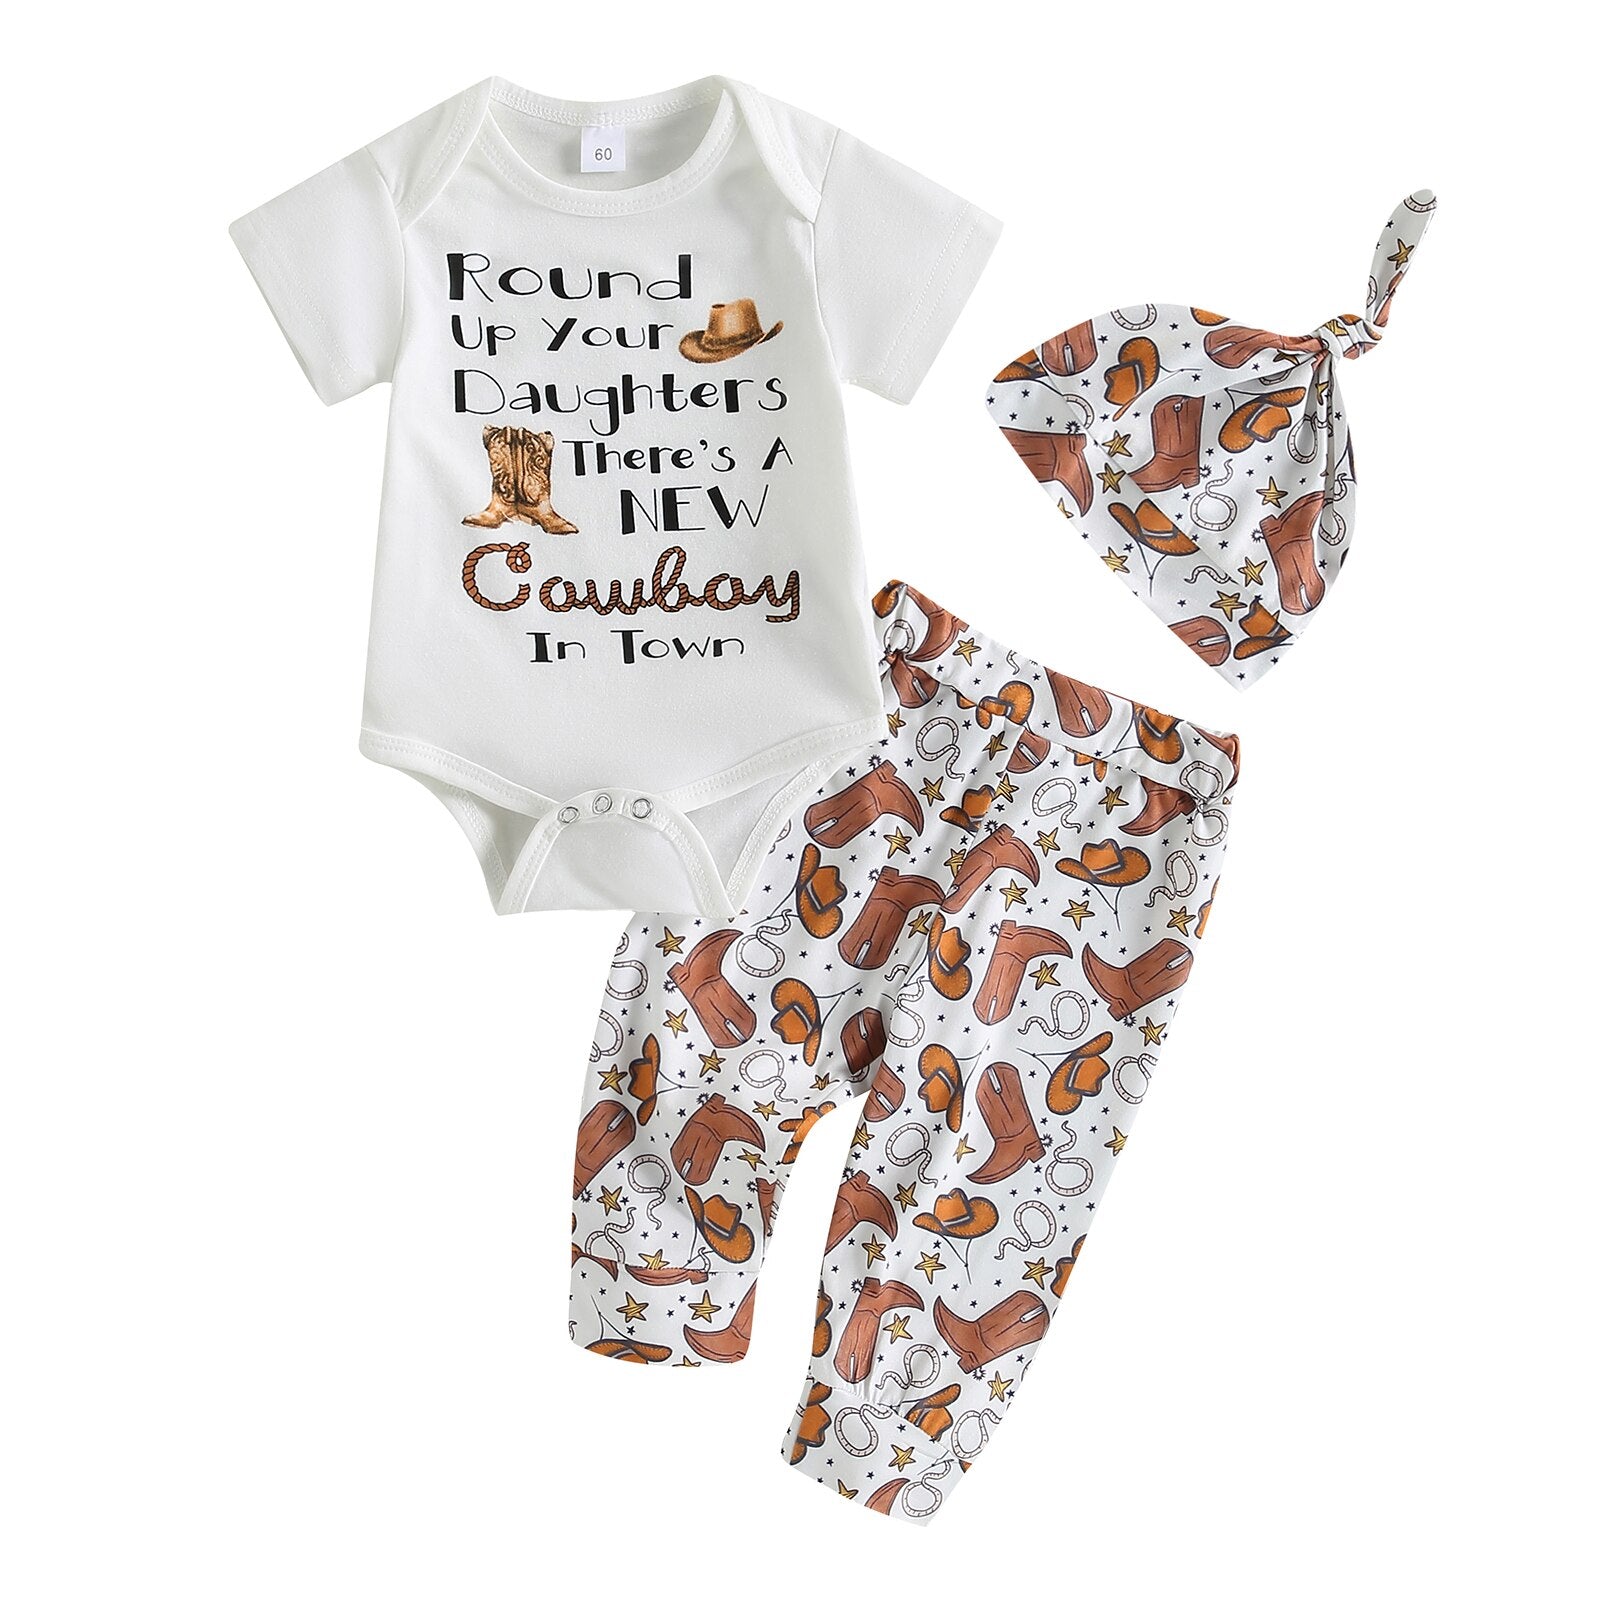 Adorable Newborn Infant Baby Boys Clothes Set with Letter Boots Print Romper, Pants, and Hat for Summer Outfits